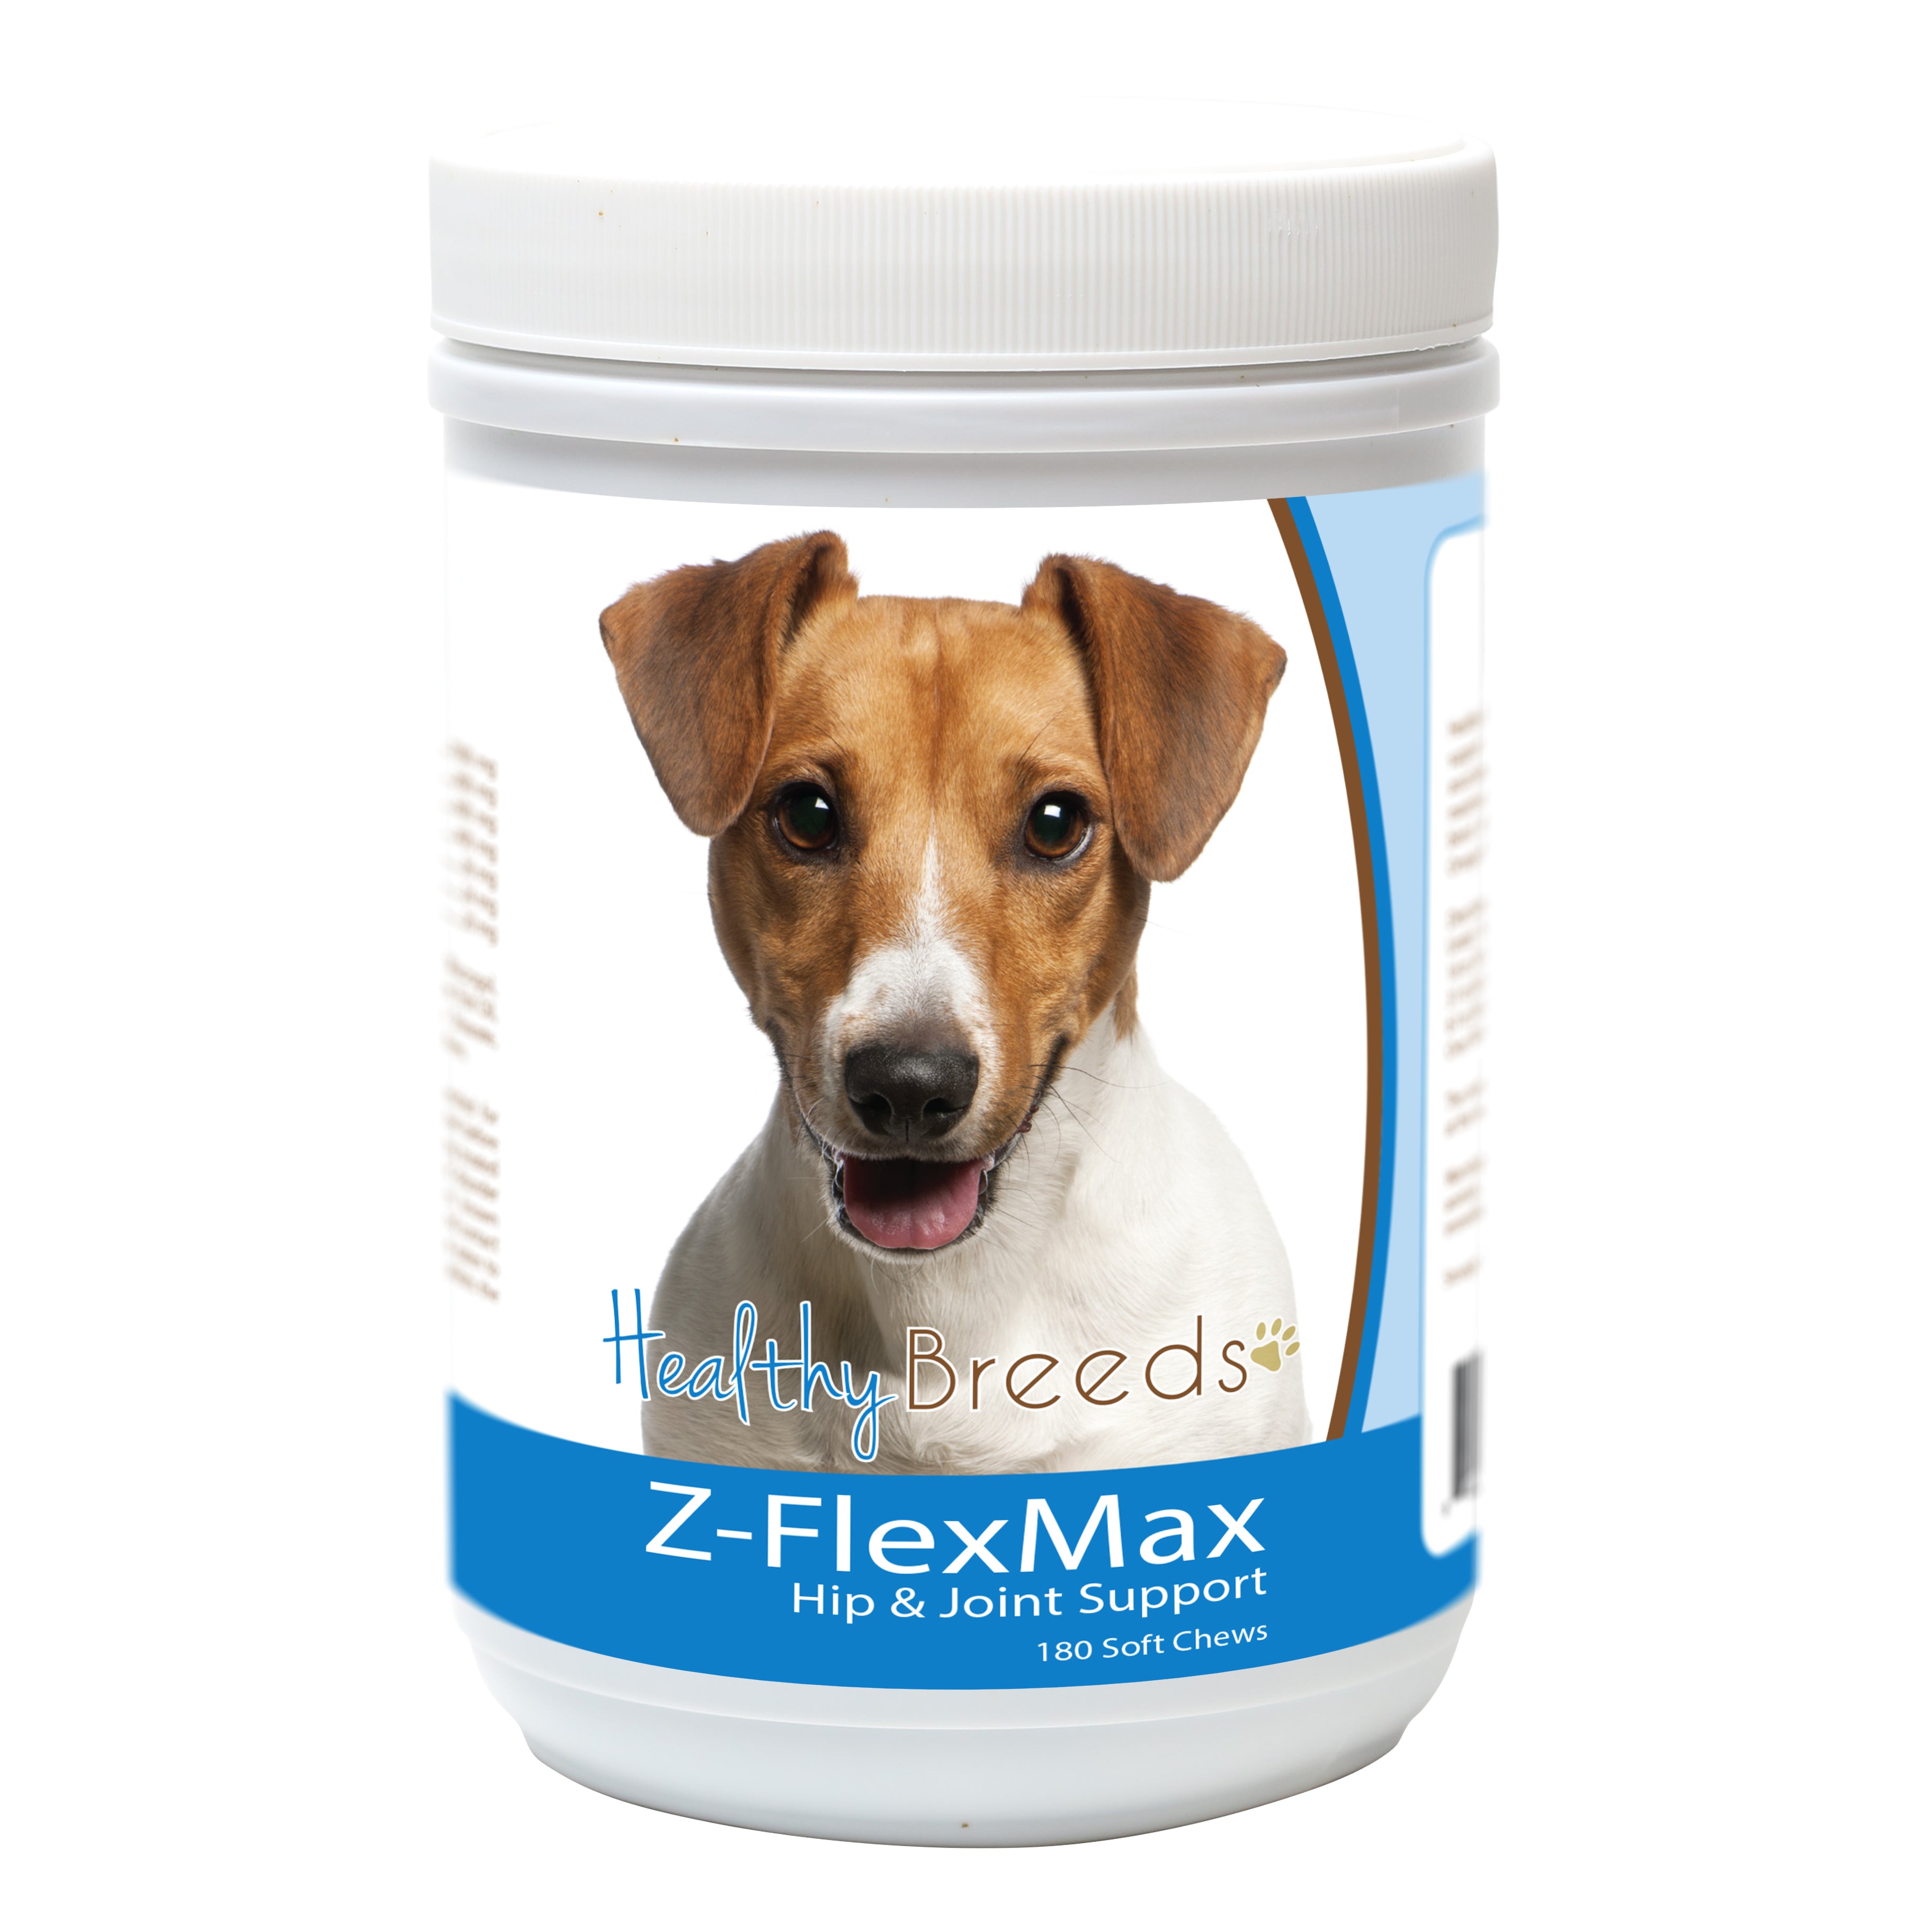 Jack Russell Terrier Z-Flex Max Dog Hip and Joint Support 180 Count